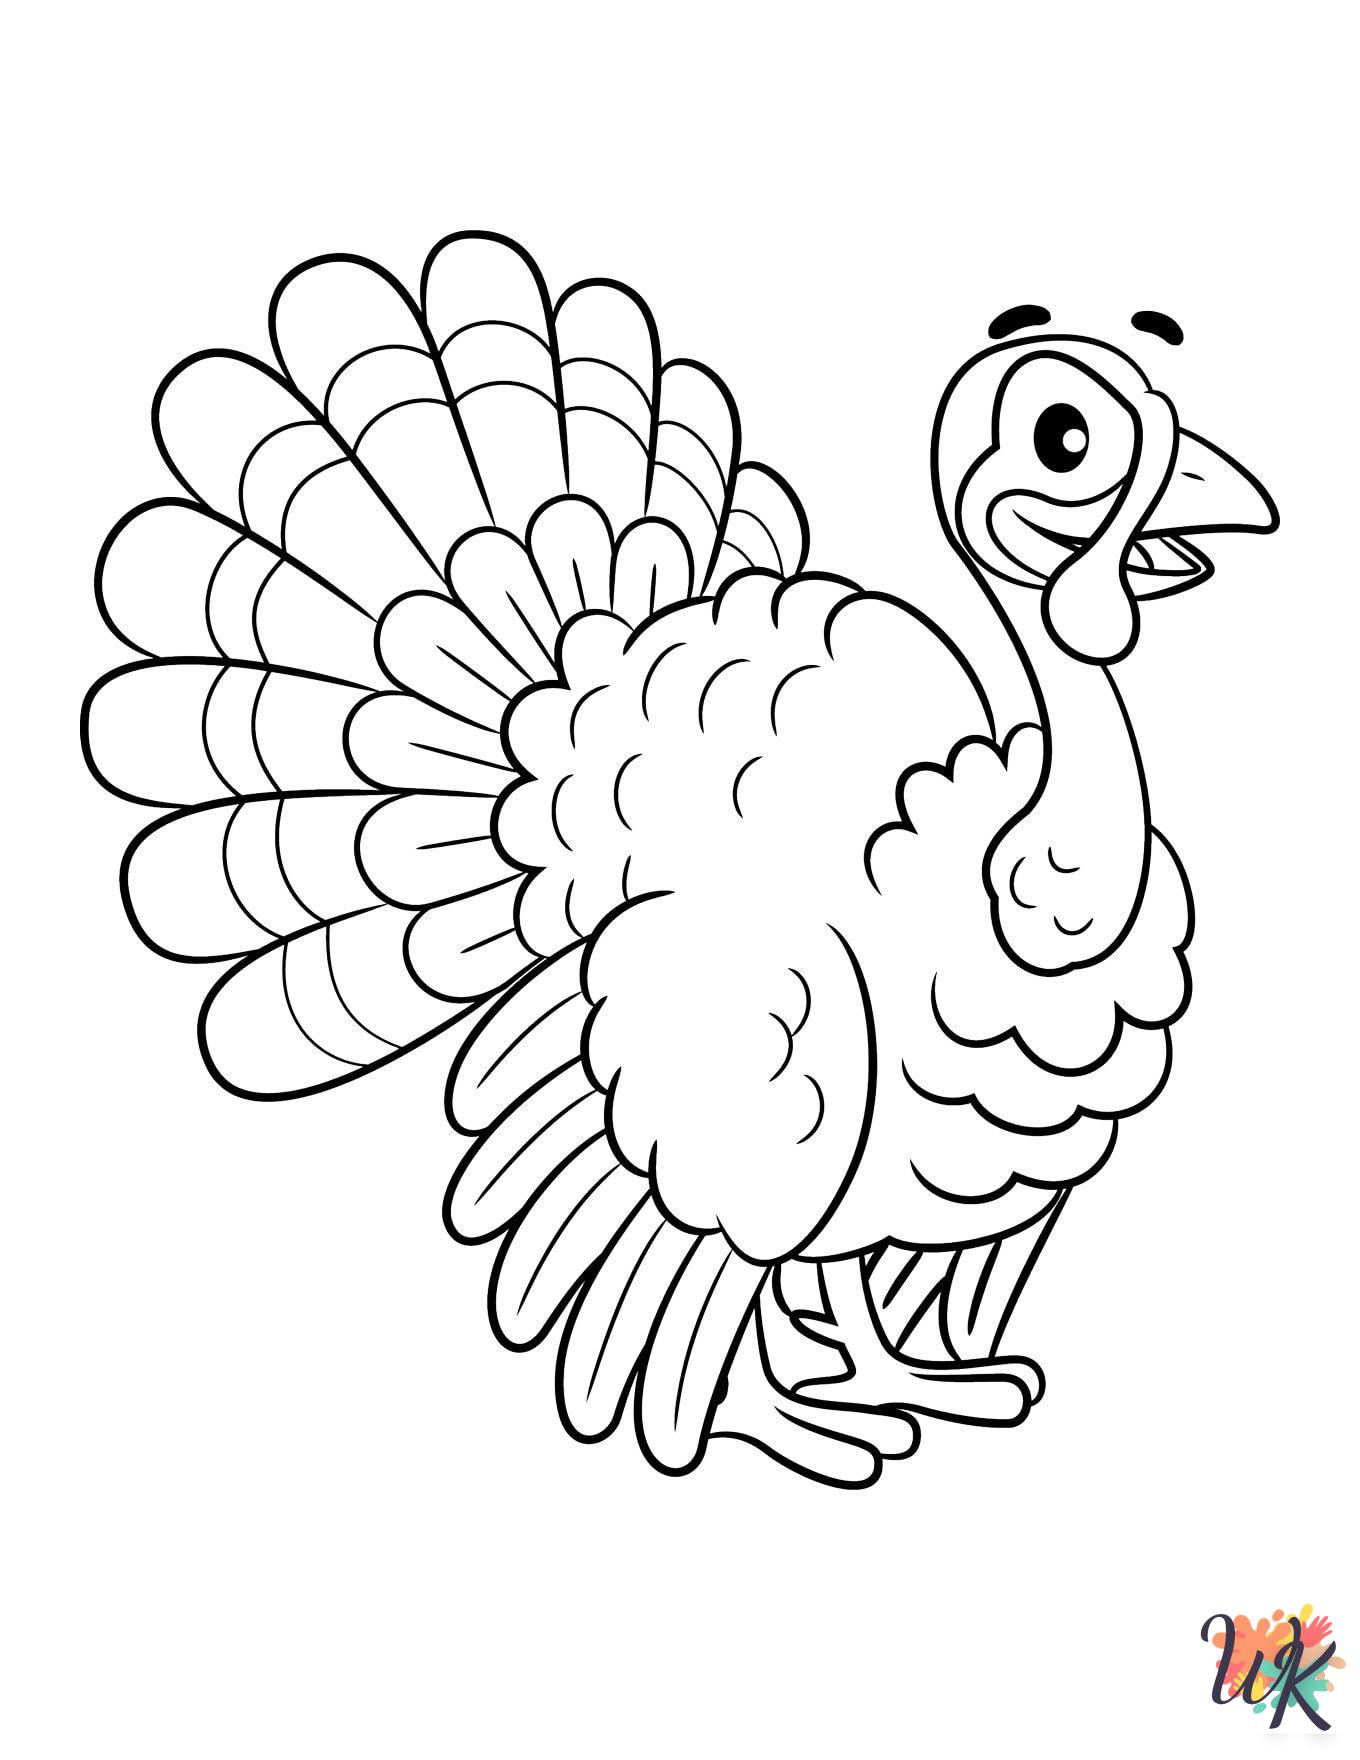 Thanksgiving coloring pages for kids